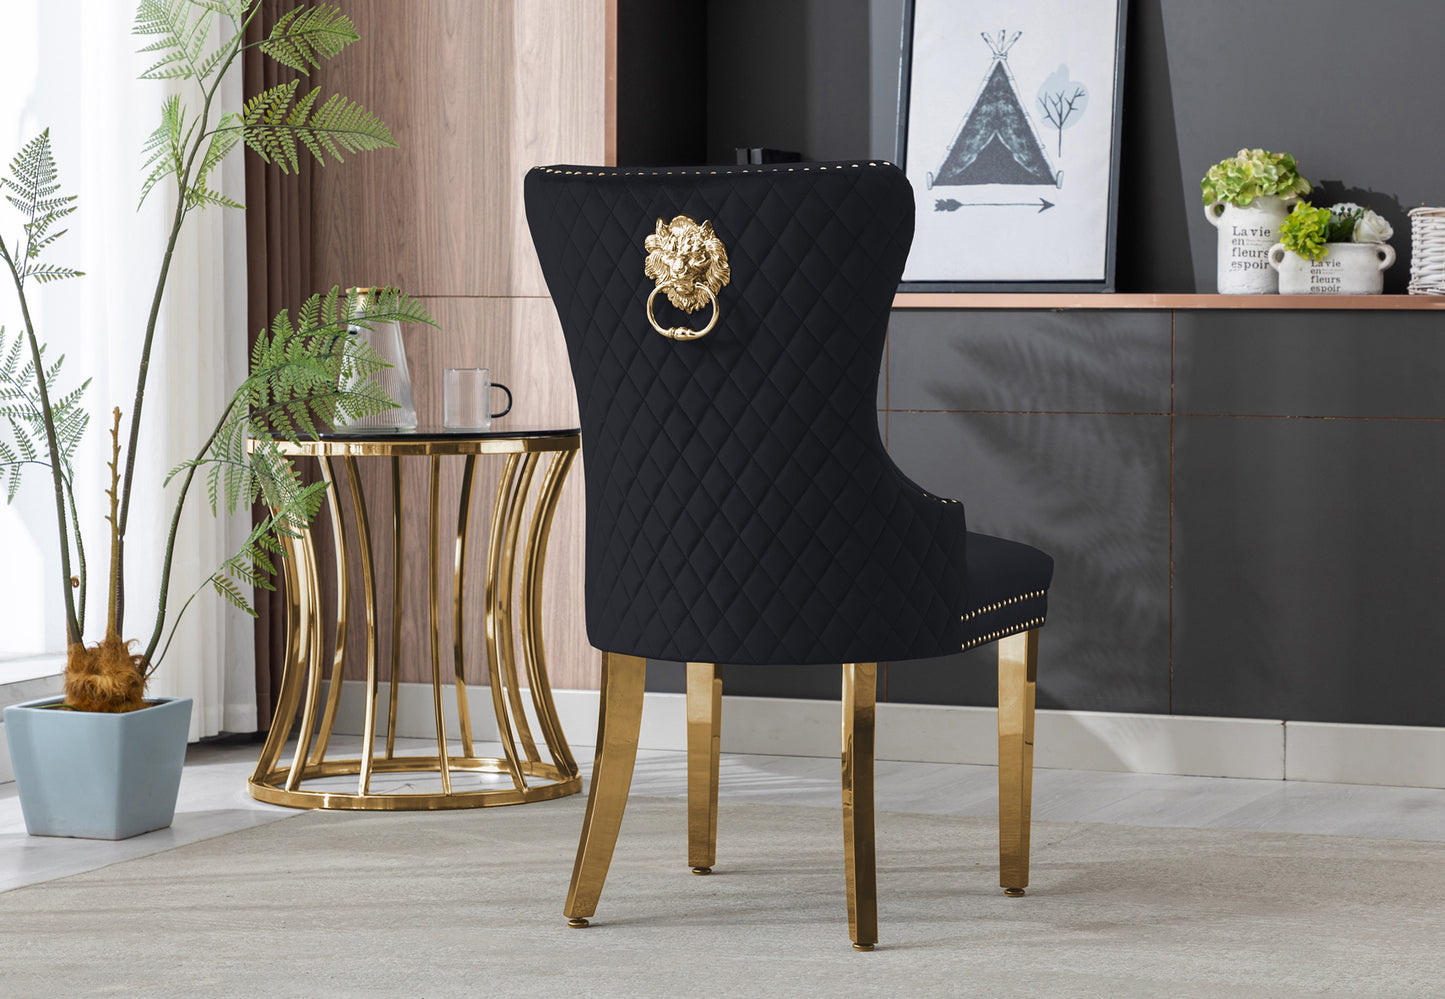 LION DINNING CHAIRS -GOLD